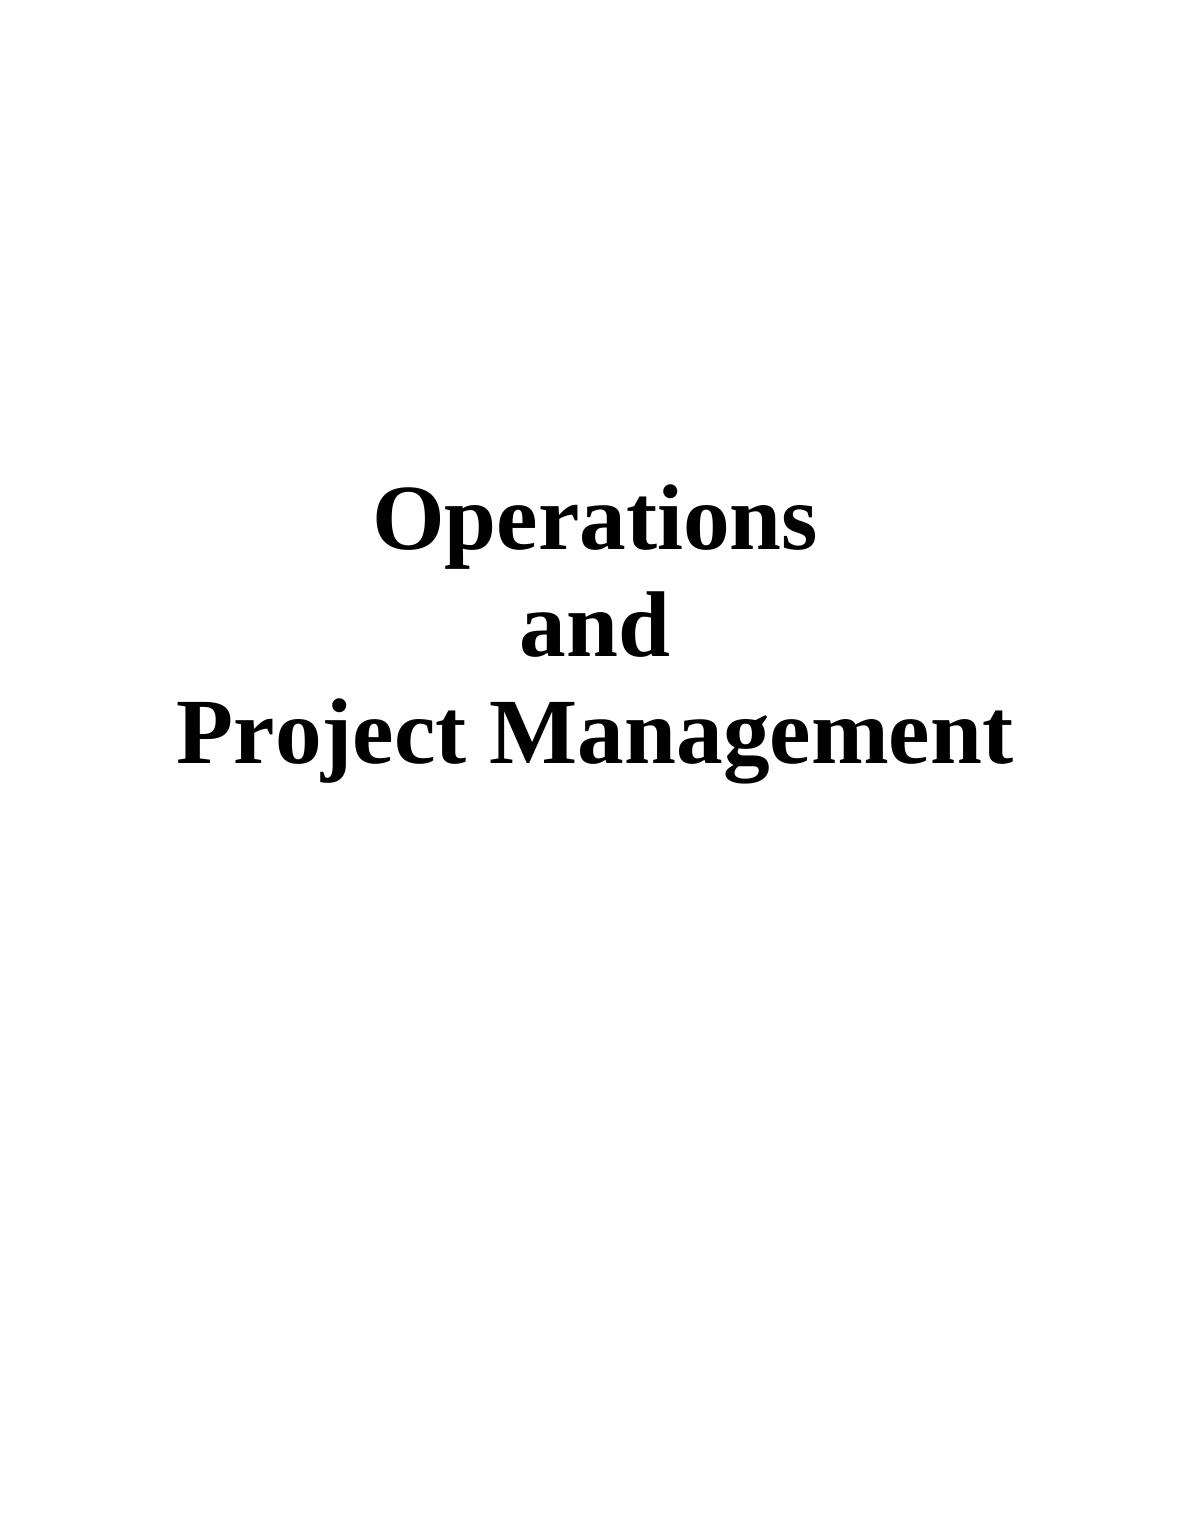 Operations and Project Management INTRODUCTION_1